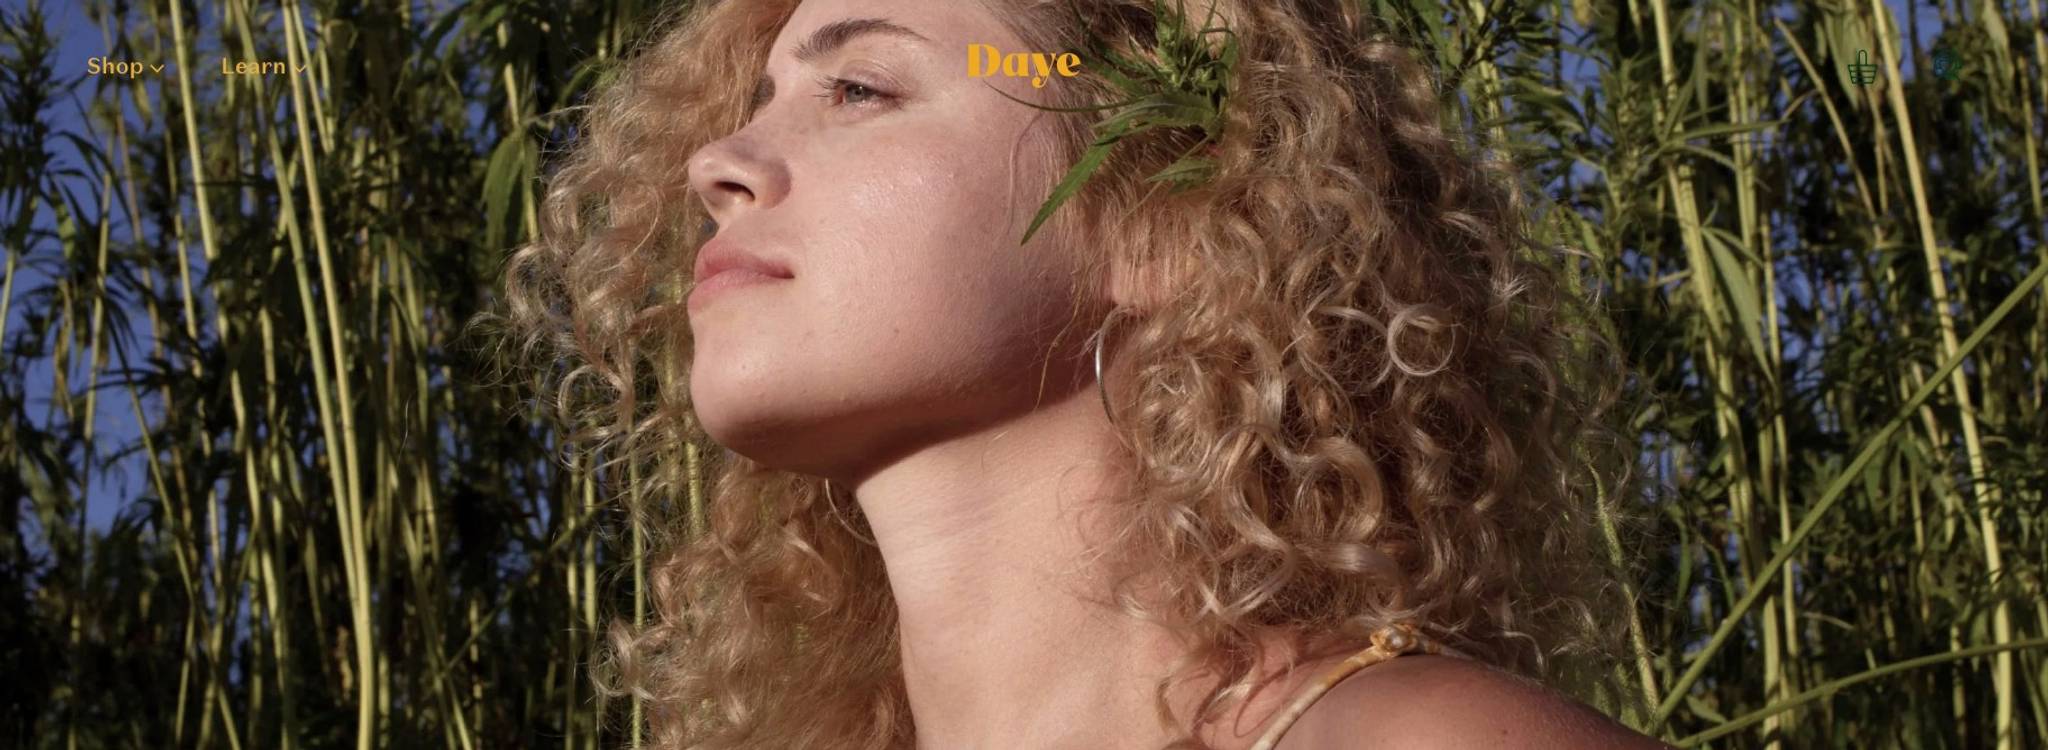 Daye: tampons for a greener period